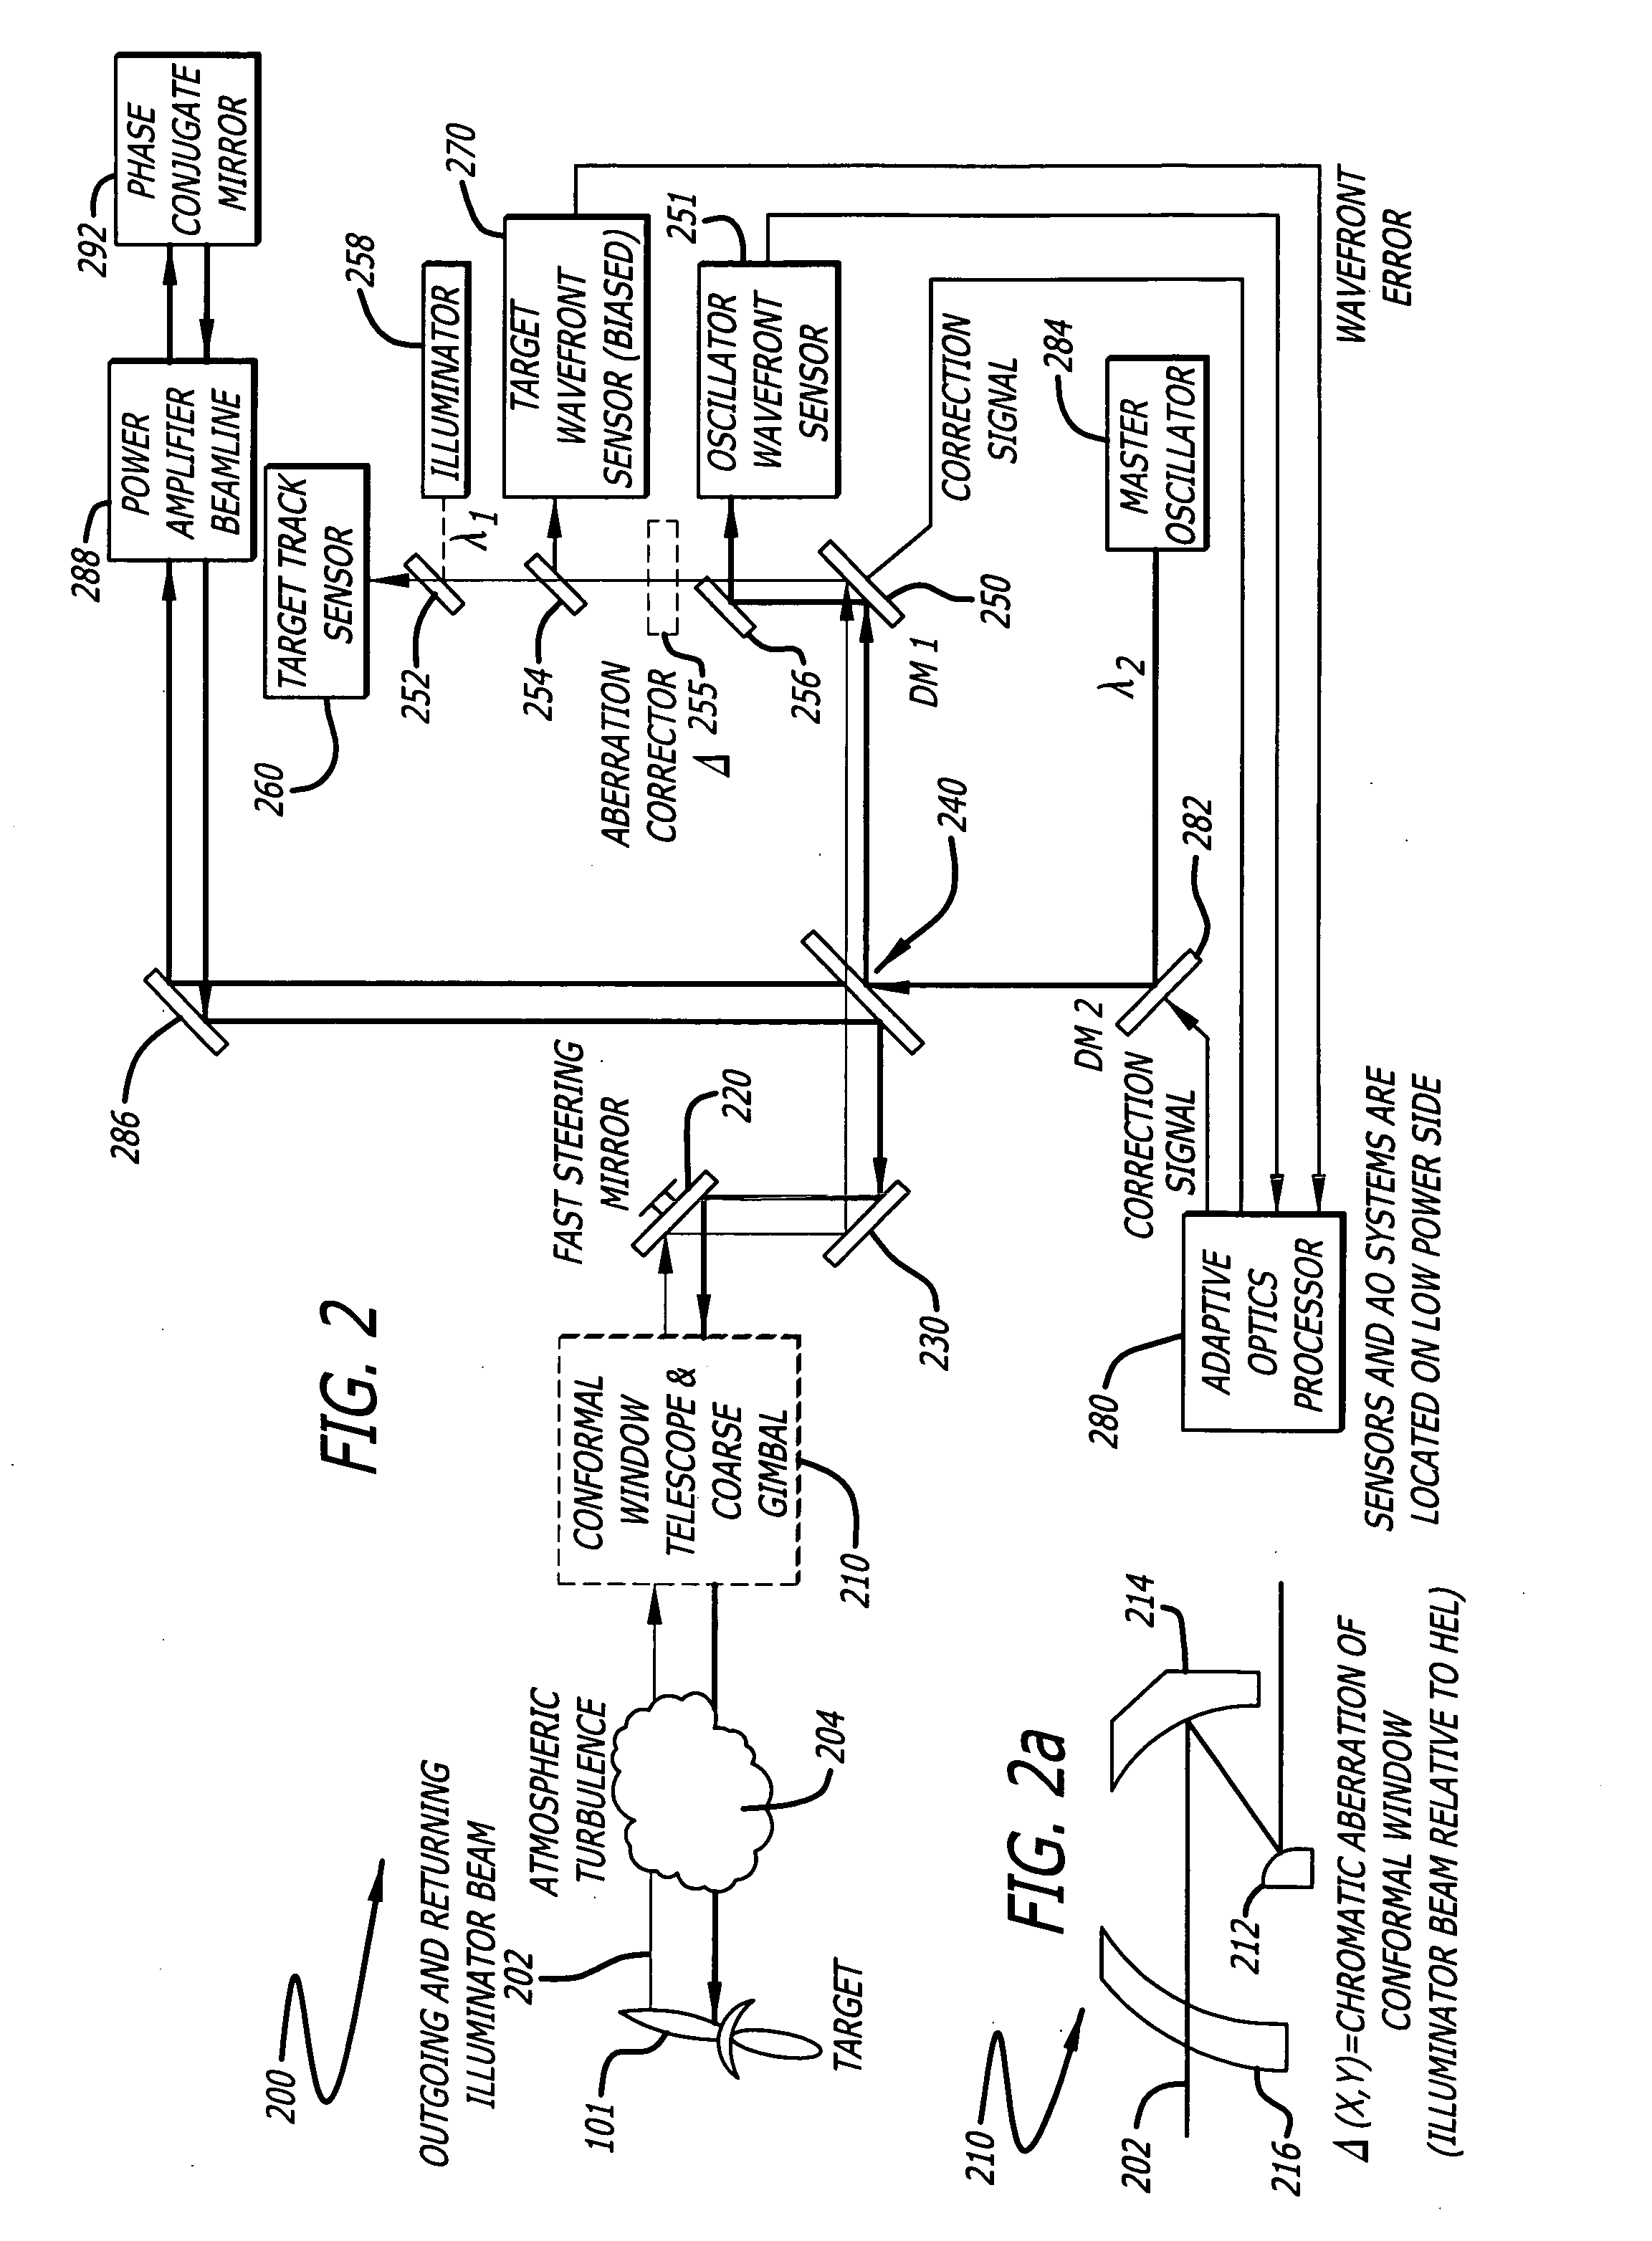 Beam director and control system for a high energy laser within a conformal window